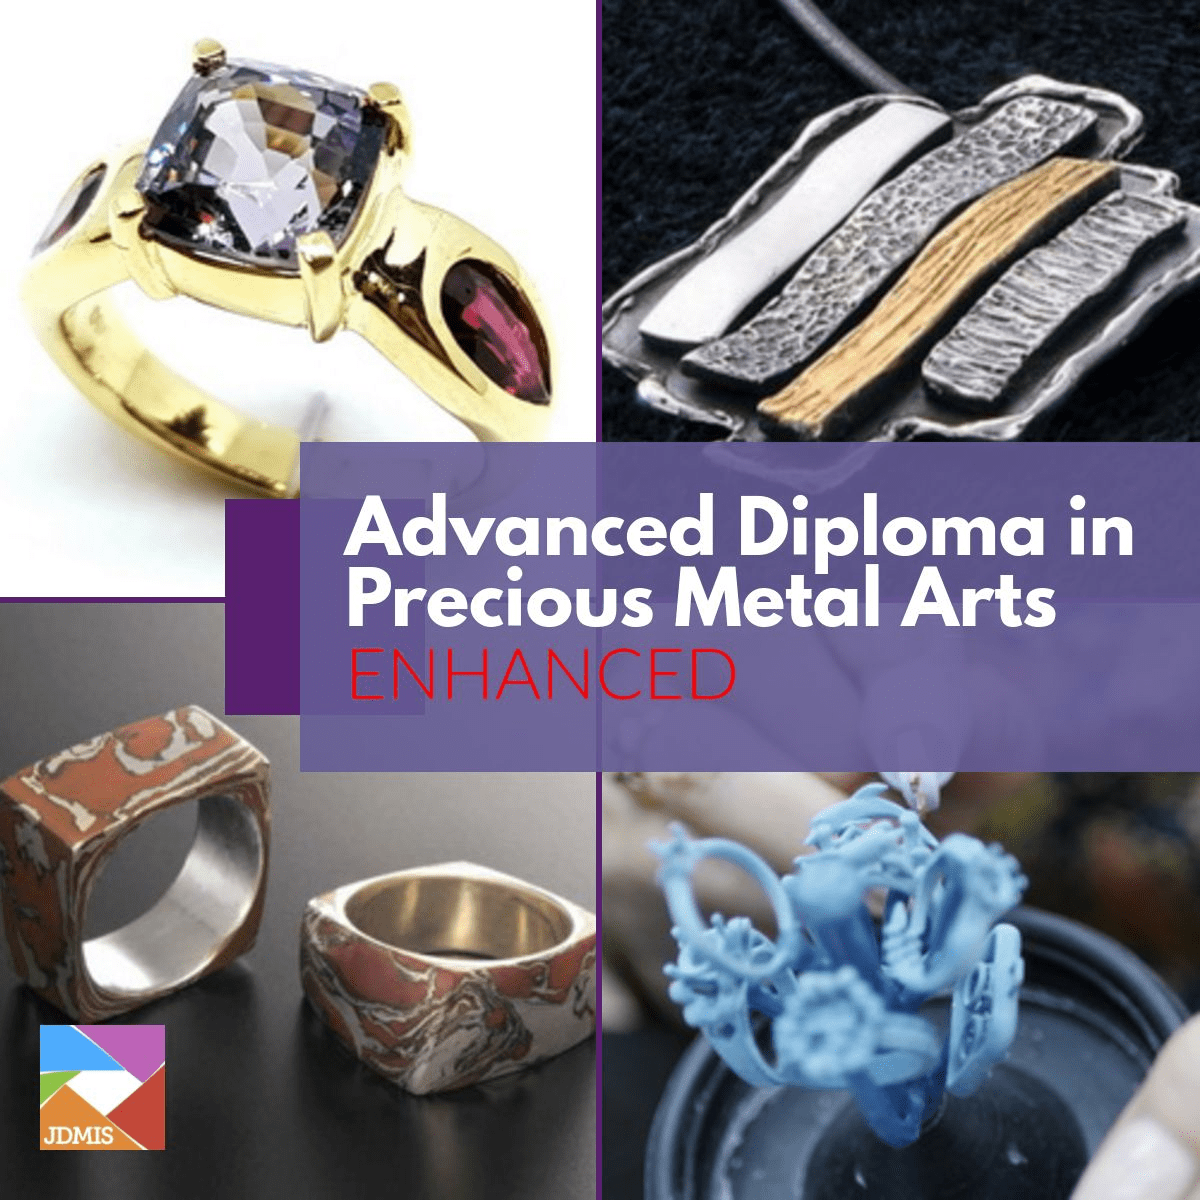 Jewellery artists rely on their taste, style and eye for detail – but often do not have the tools or understanding needed to execute their best ideas. Working with...